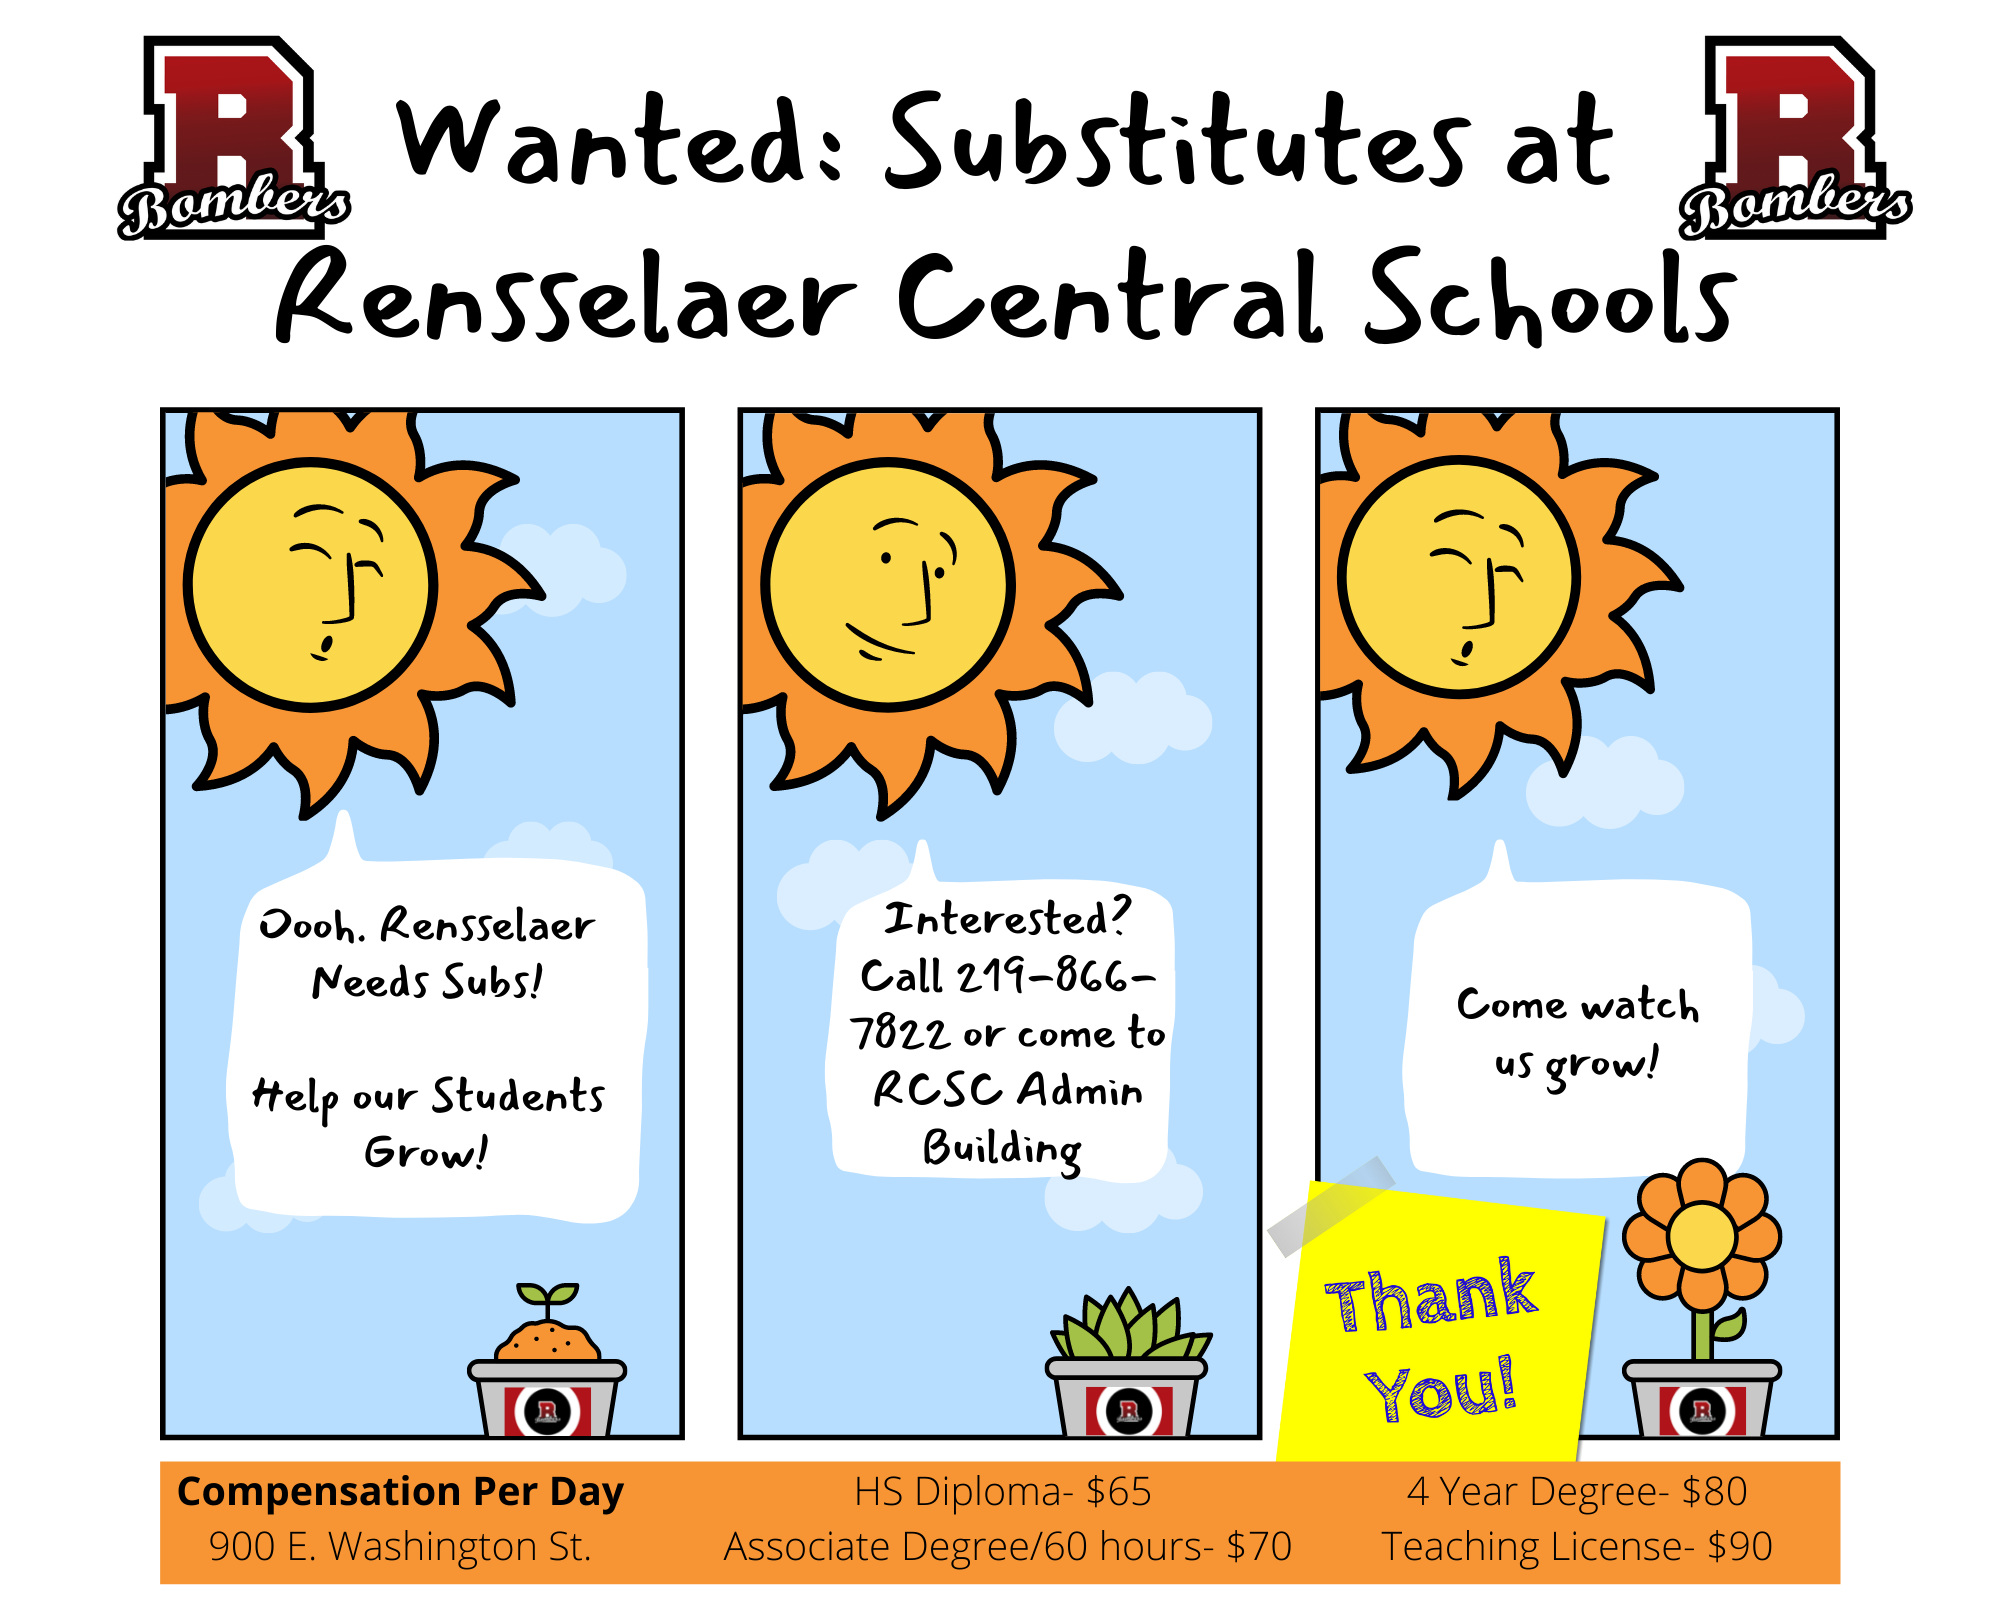 Wanted Substitutes at Rensselaer Central Schools